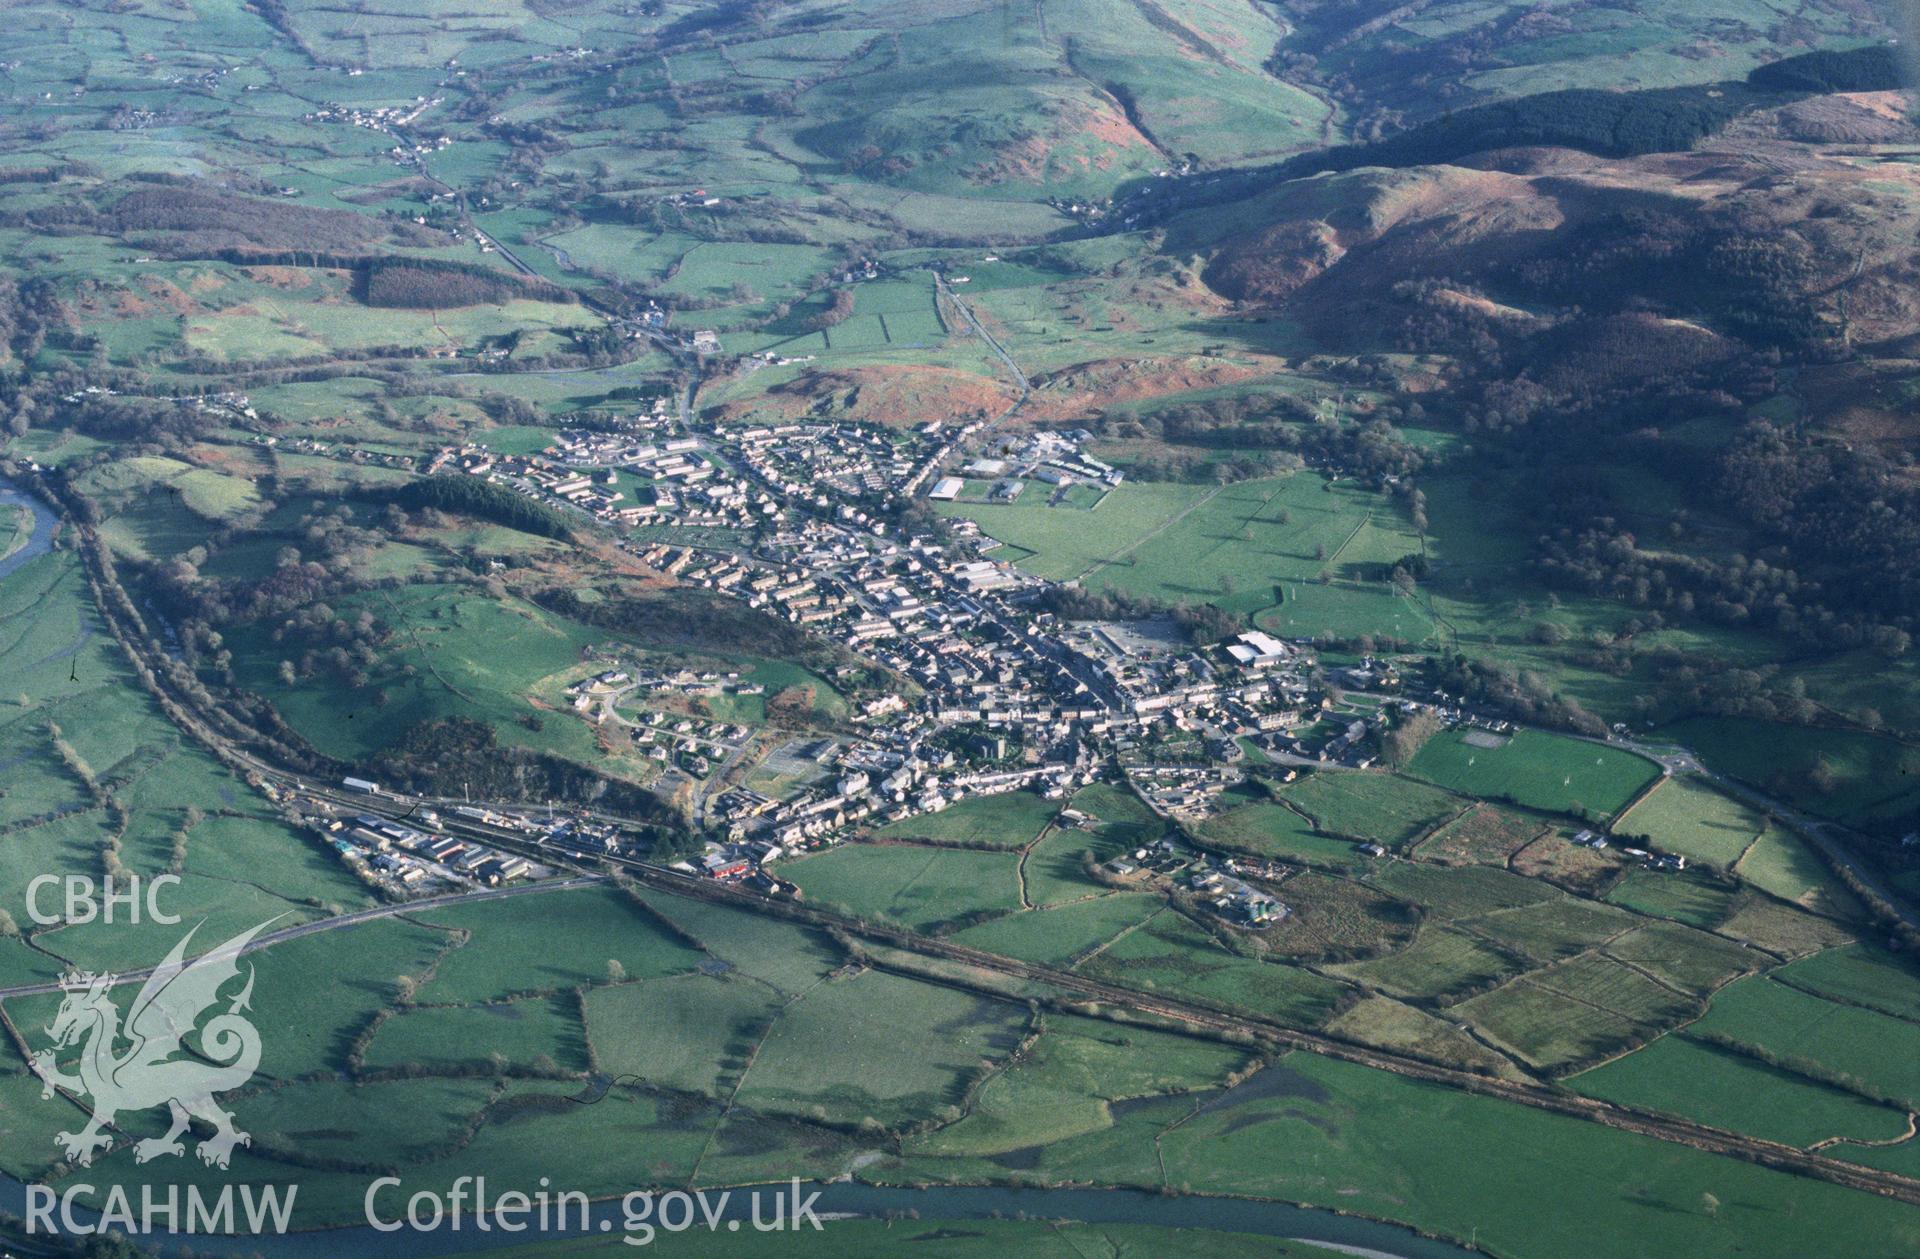 Slide of RCAHMW colour oblique aerial photograph of Machynnlleth, taken by T.G. Driver, 14/2/2002.